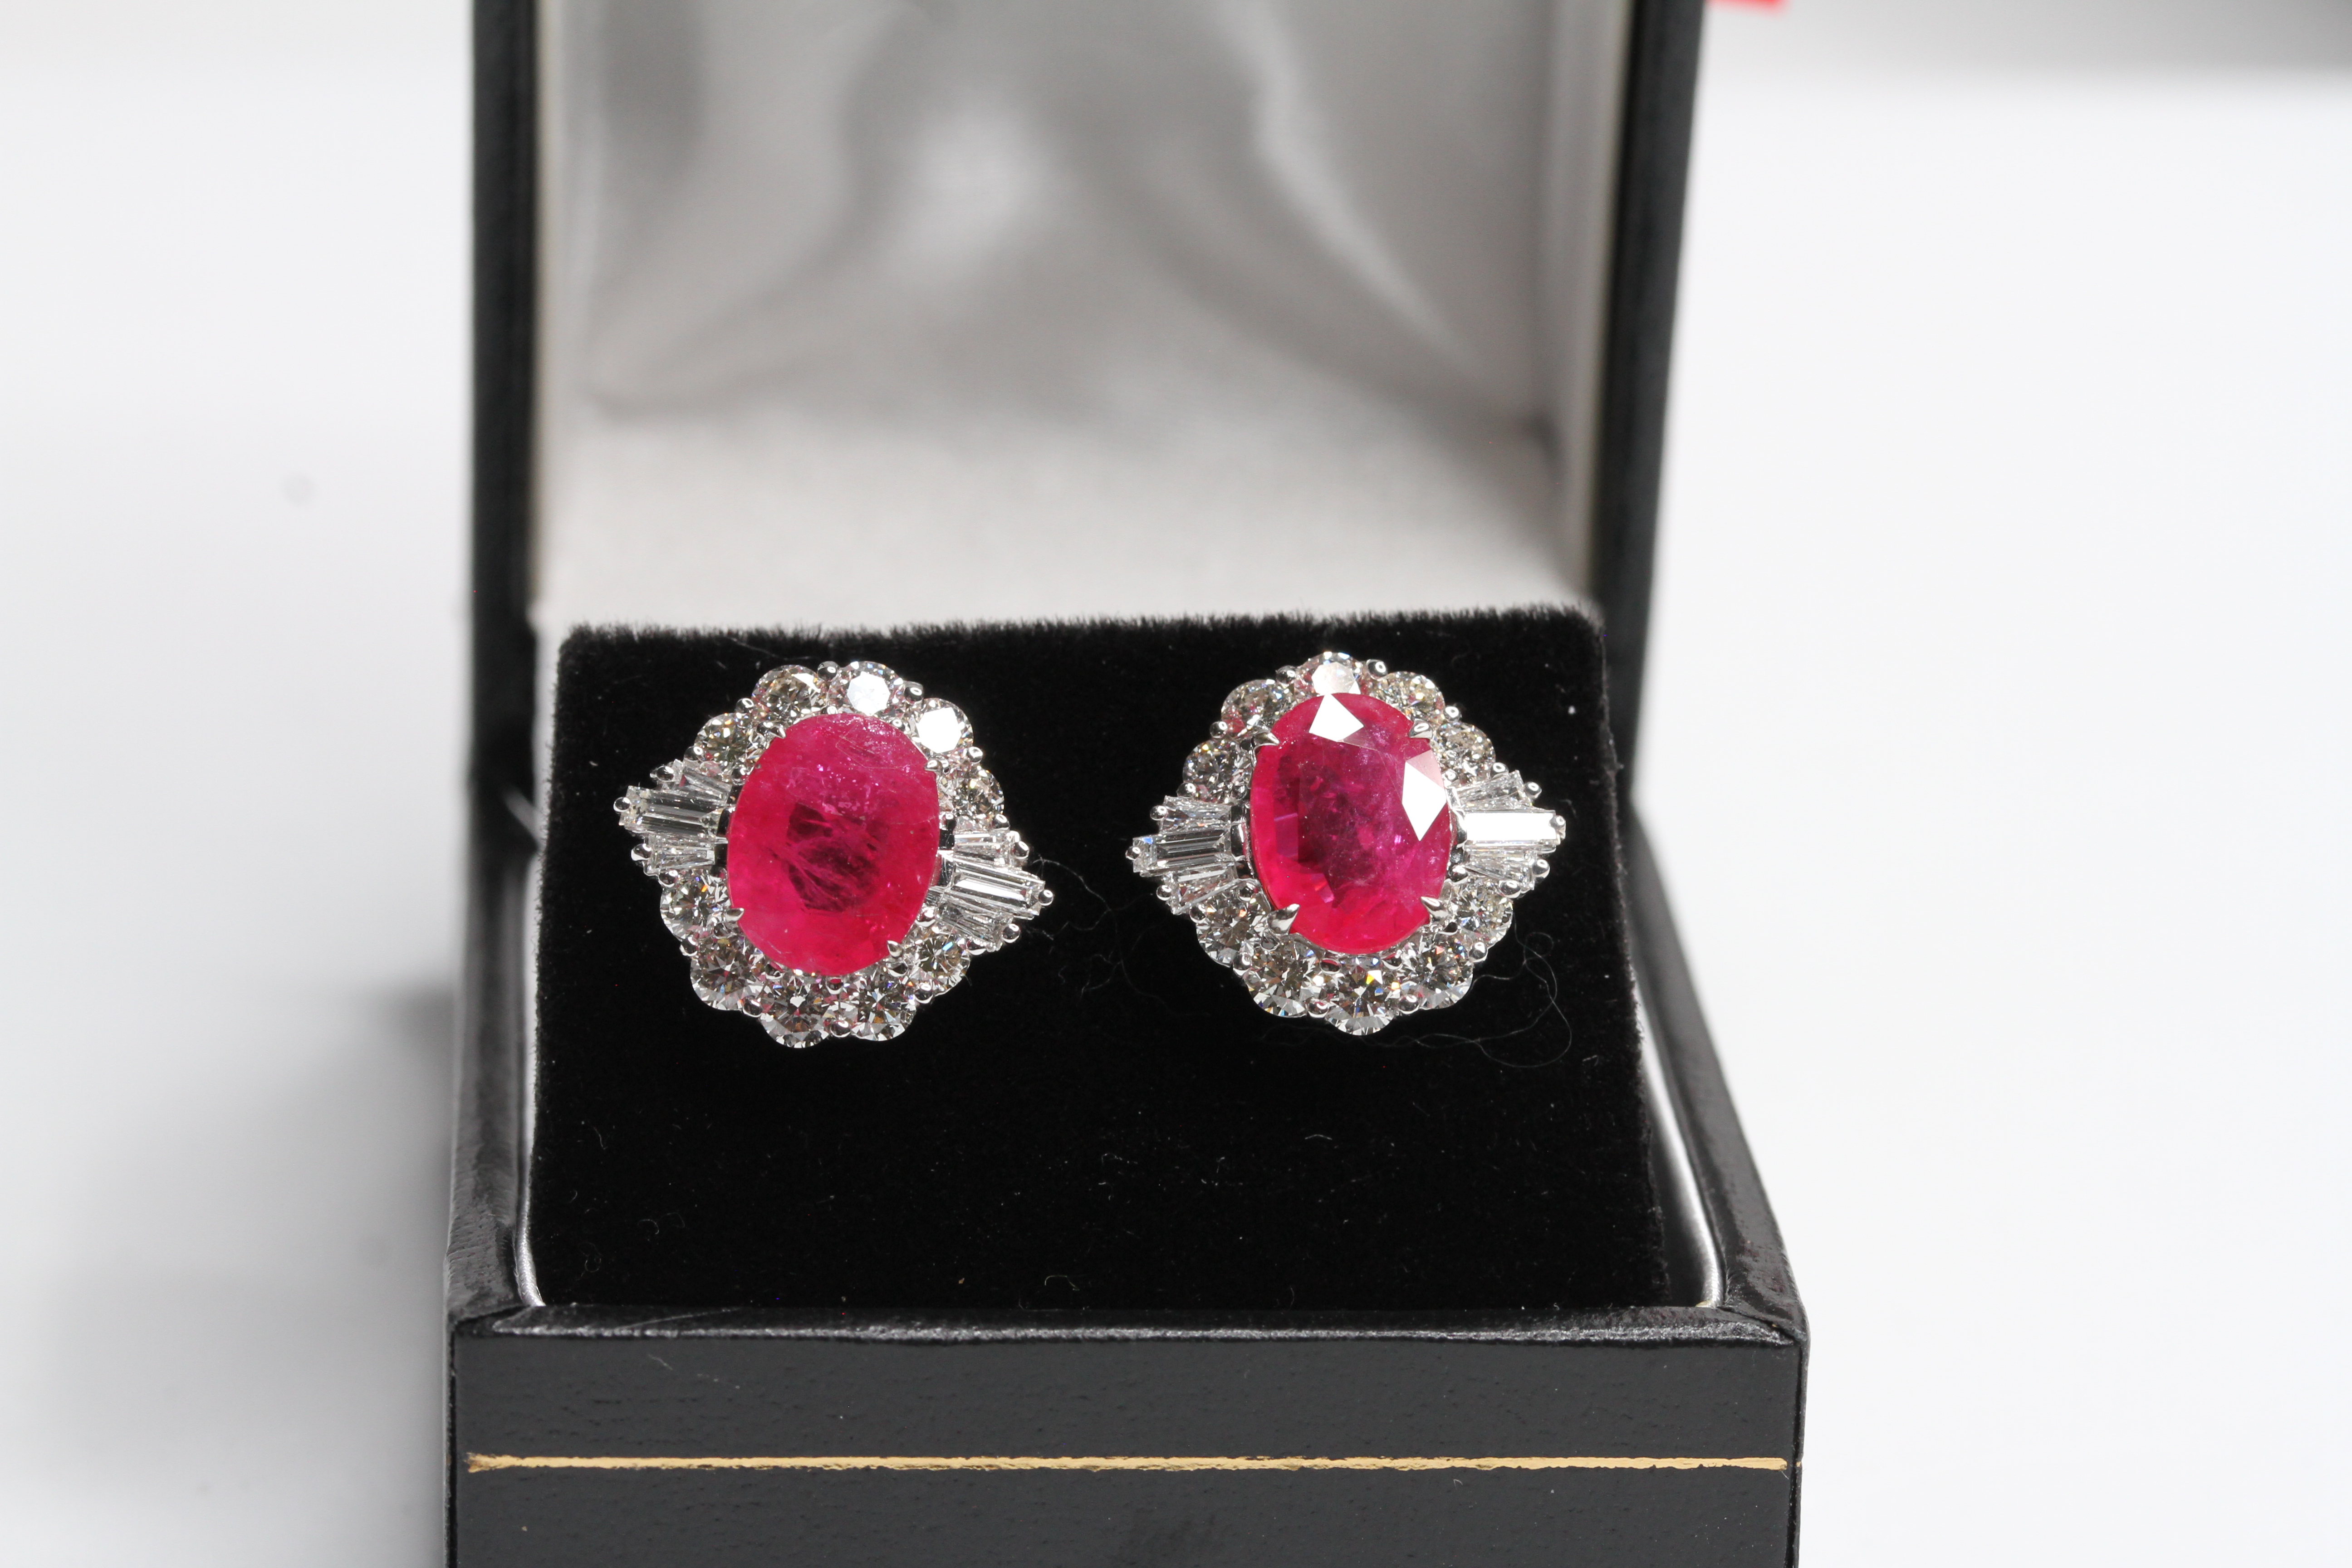 18WG Oval ruby and diamond cluster earrings with baguettes at the halfway point. R3.82/1.63 double